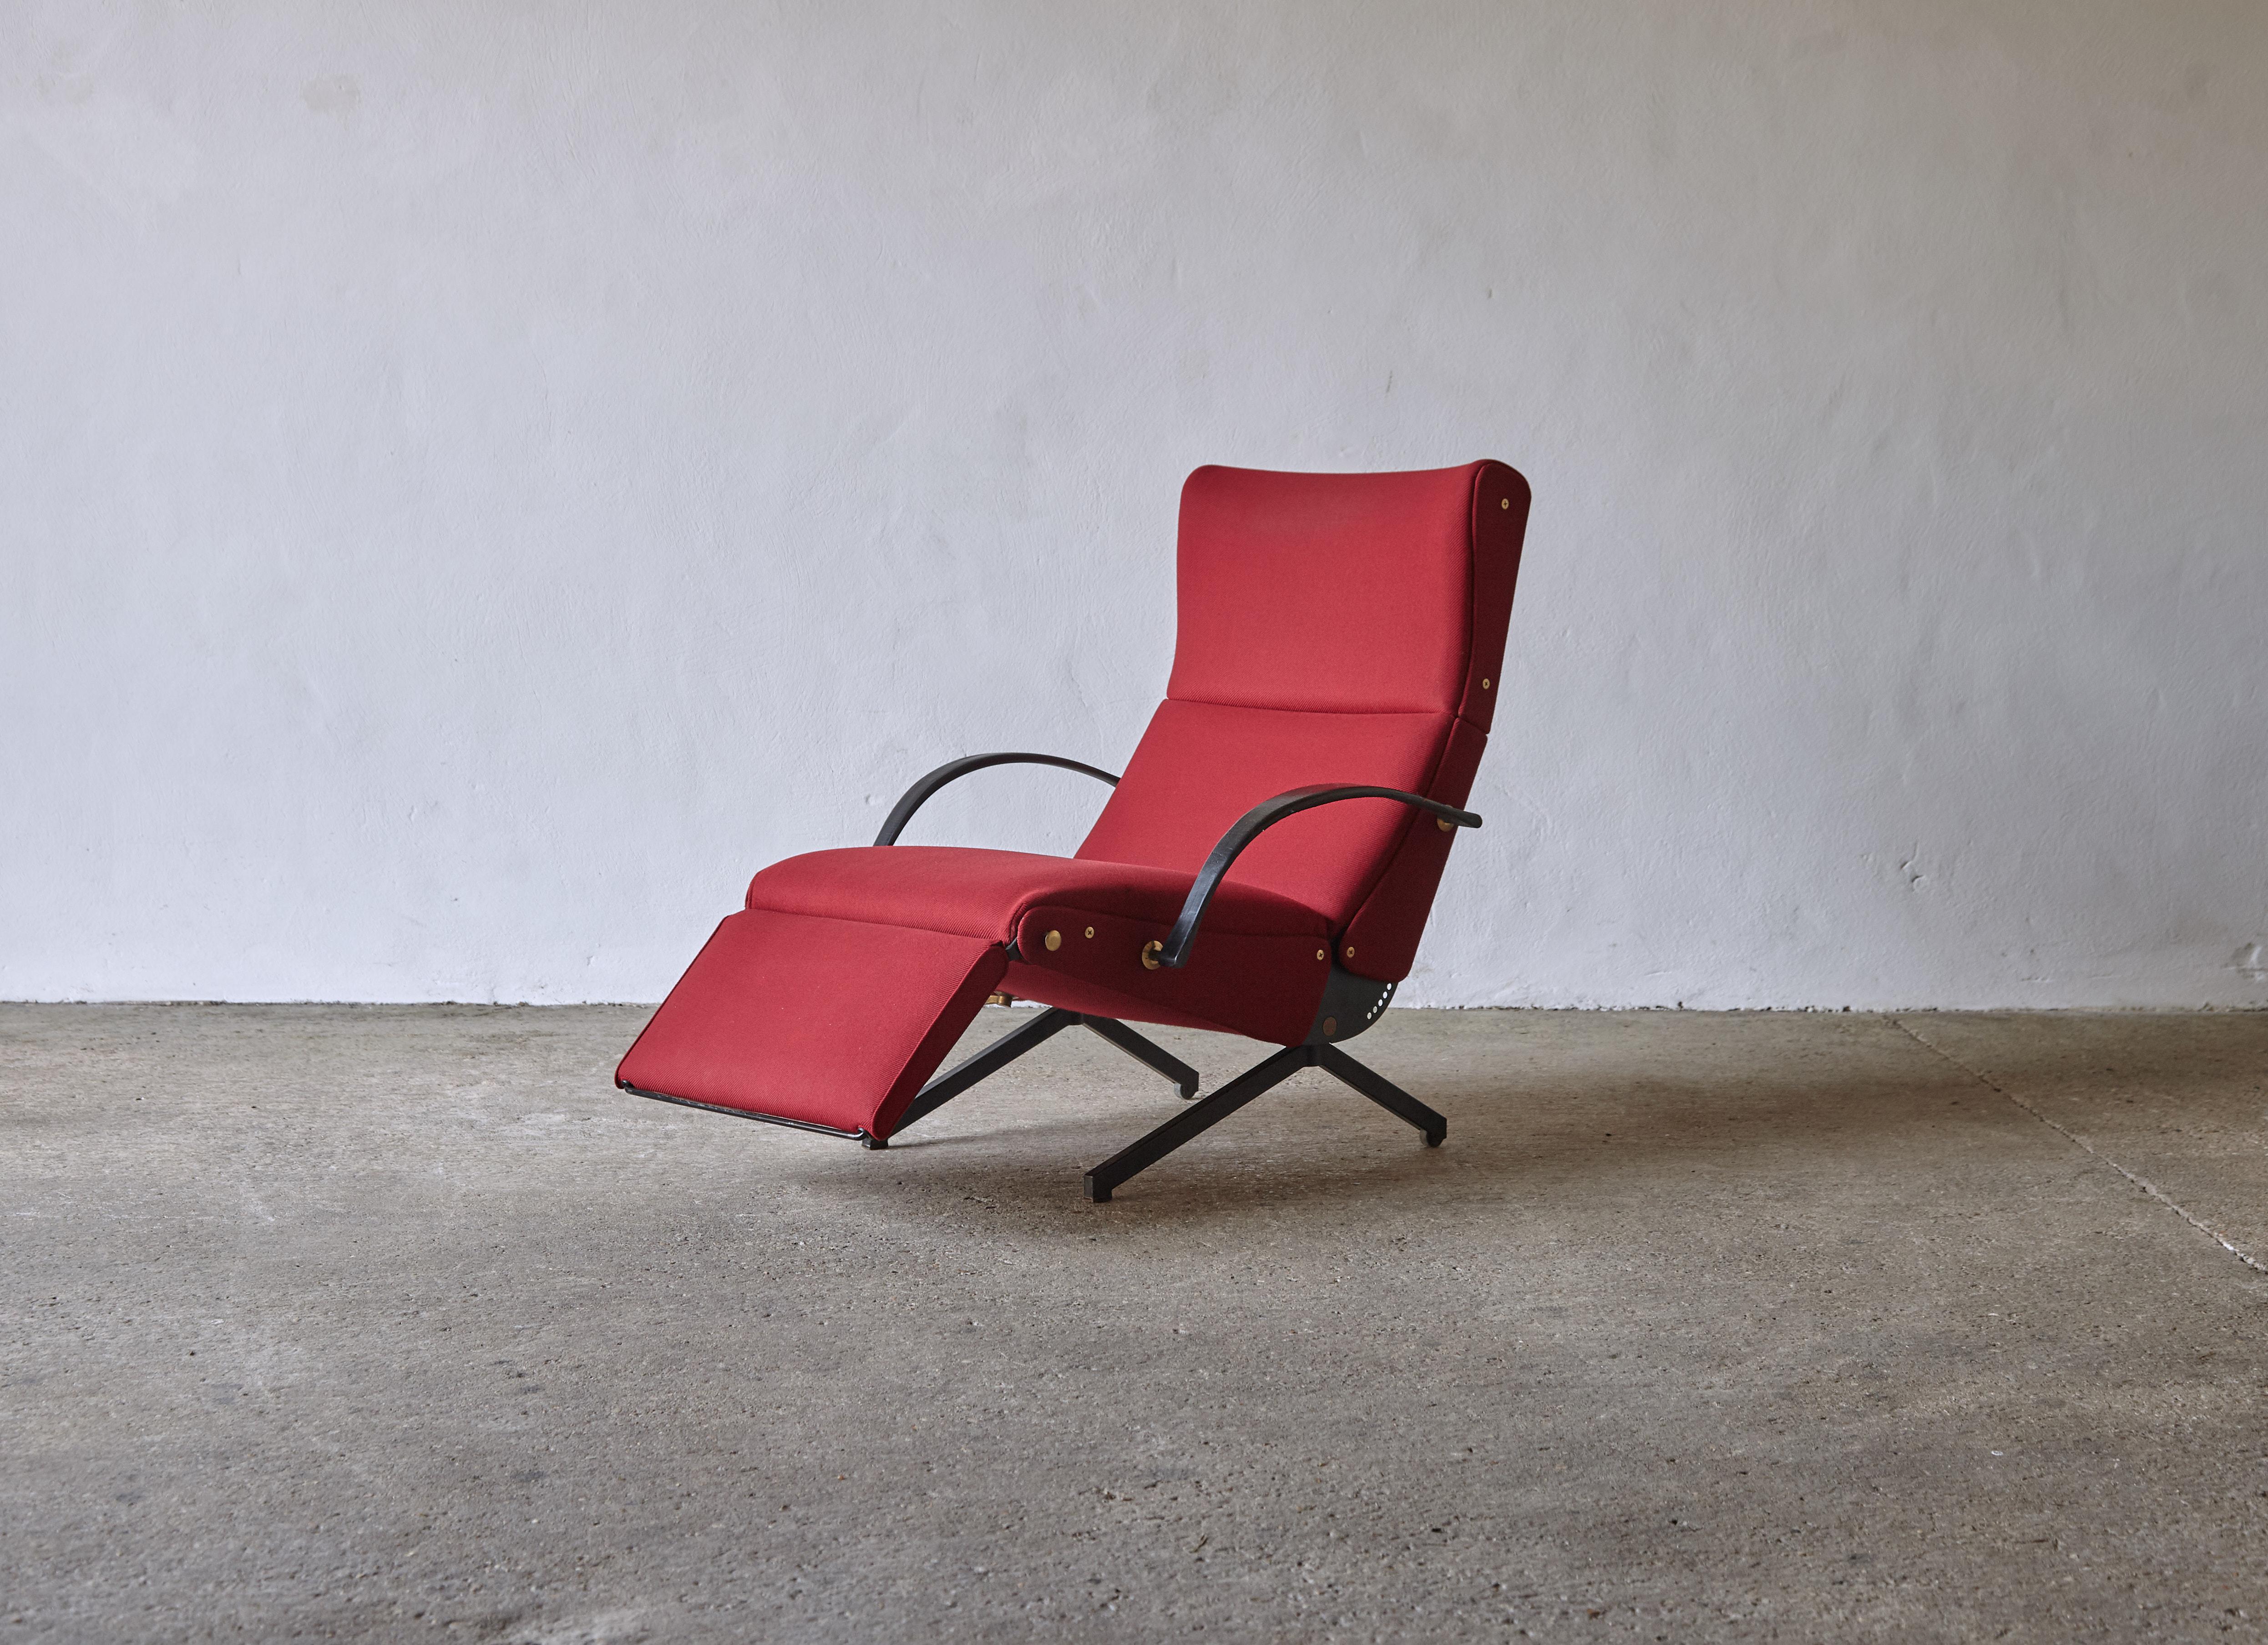 An original Osvaldo Borsani P40 Reclining Chair, Tecno, Italy, 1950s. All hardware in working order. Reclines and adjusts into a huge array of positions. Original fabric with a couple of very minor marks and one very small bit of damage (see final